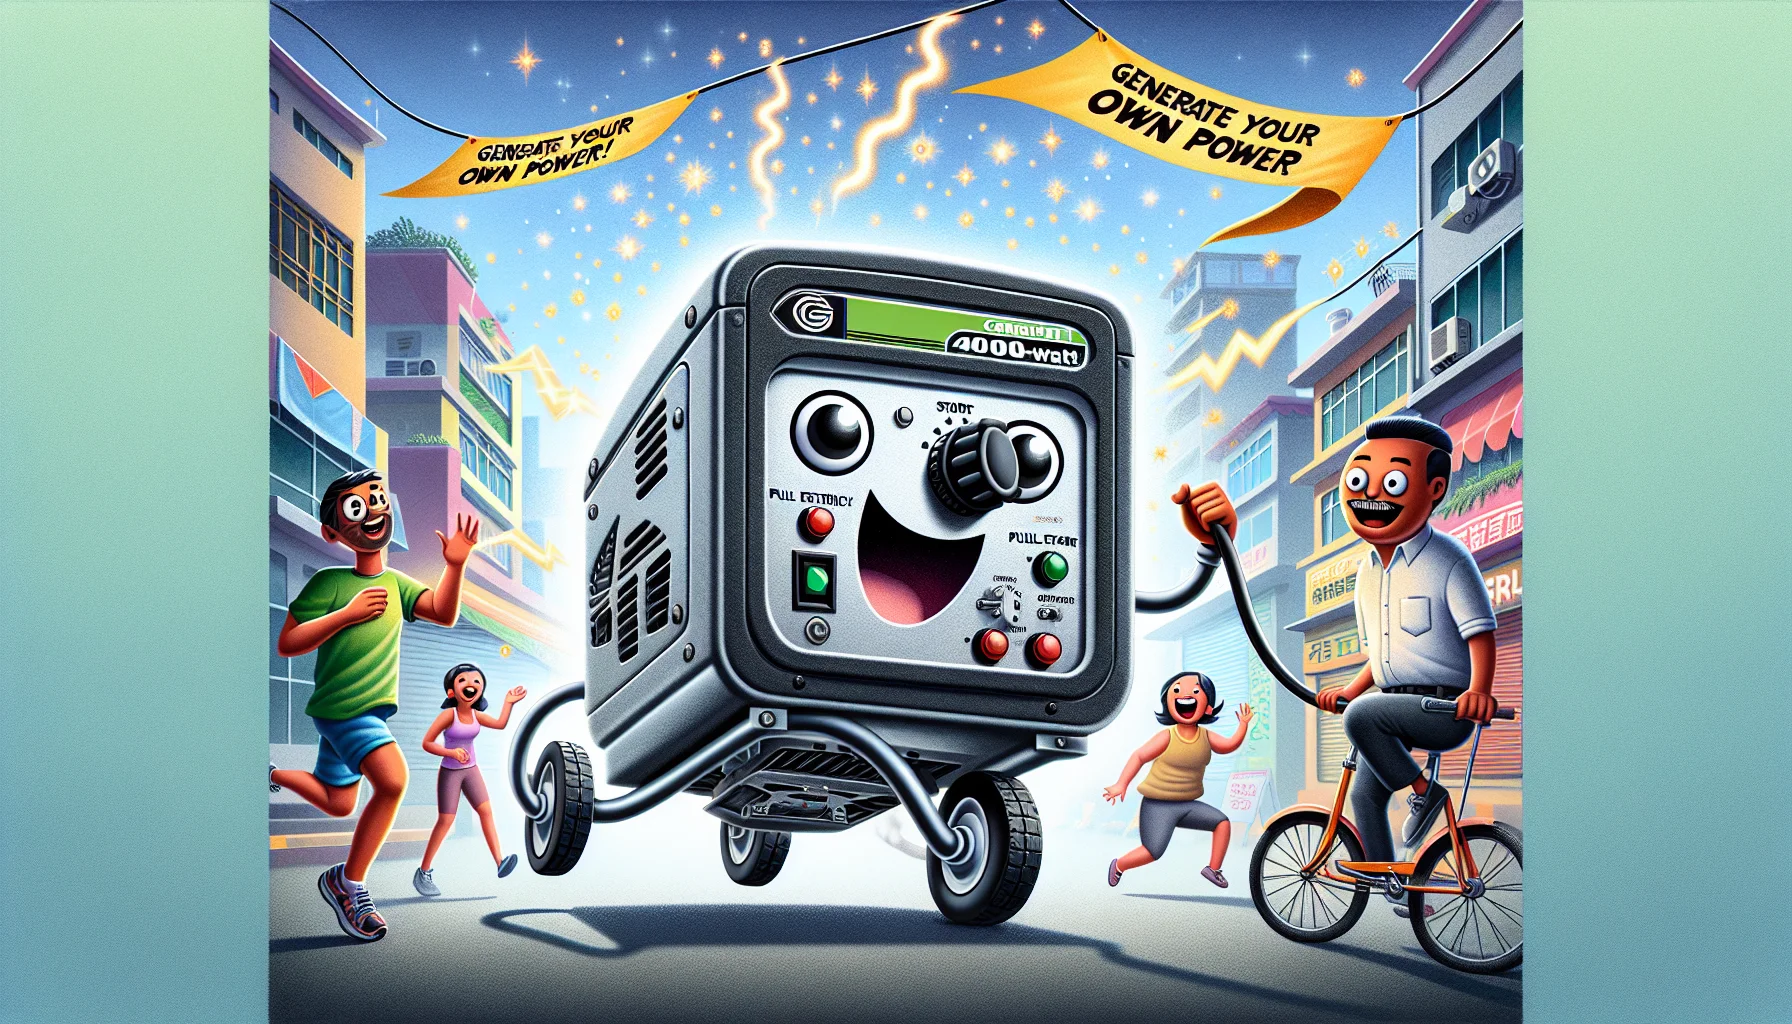 Create a highly detailed and humorous image of a mid-sized, rectangular 4000-watt generator playfully personified. Its control panel has face-like features, with knobs acting as eyes, the pull start as a quirky nose, and an exhaust outlet as its open mouth from where sparkles, signifying electricity, are bursting out. The generator is having a spirited zig-zag dance in a clean urban neighborhood. Excited onlookers—a Caucasian female jogger, a Middle-Eastern male postman, and a South Asian kid on a bicycle—are laughing and clapping. Banners that say 'Generate Your Own Power!' are fluttering in the background sky.